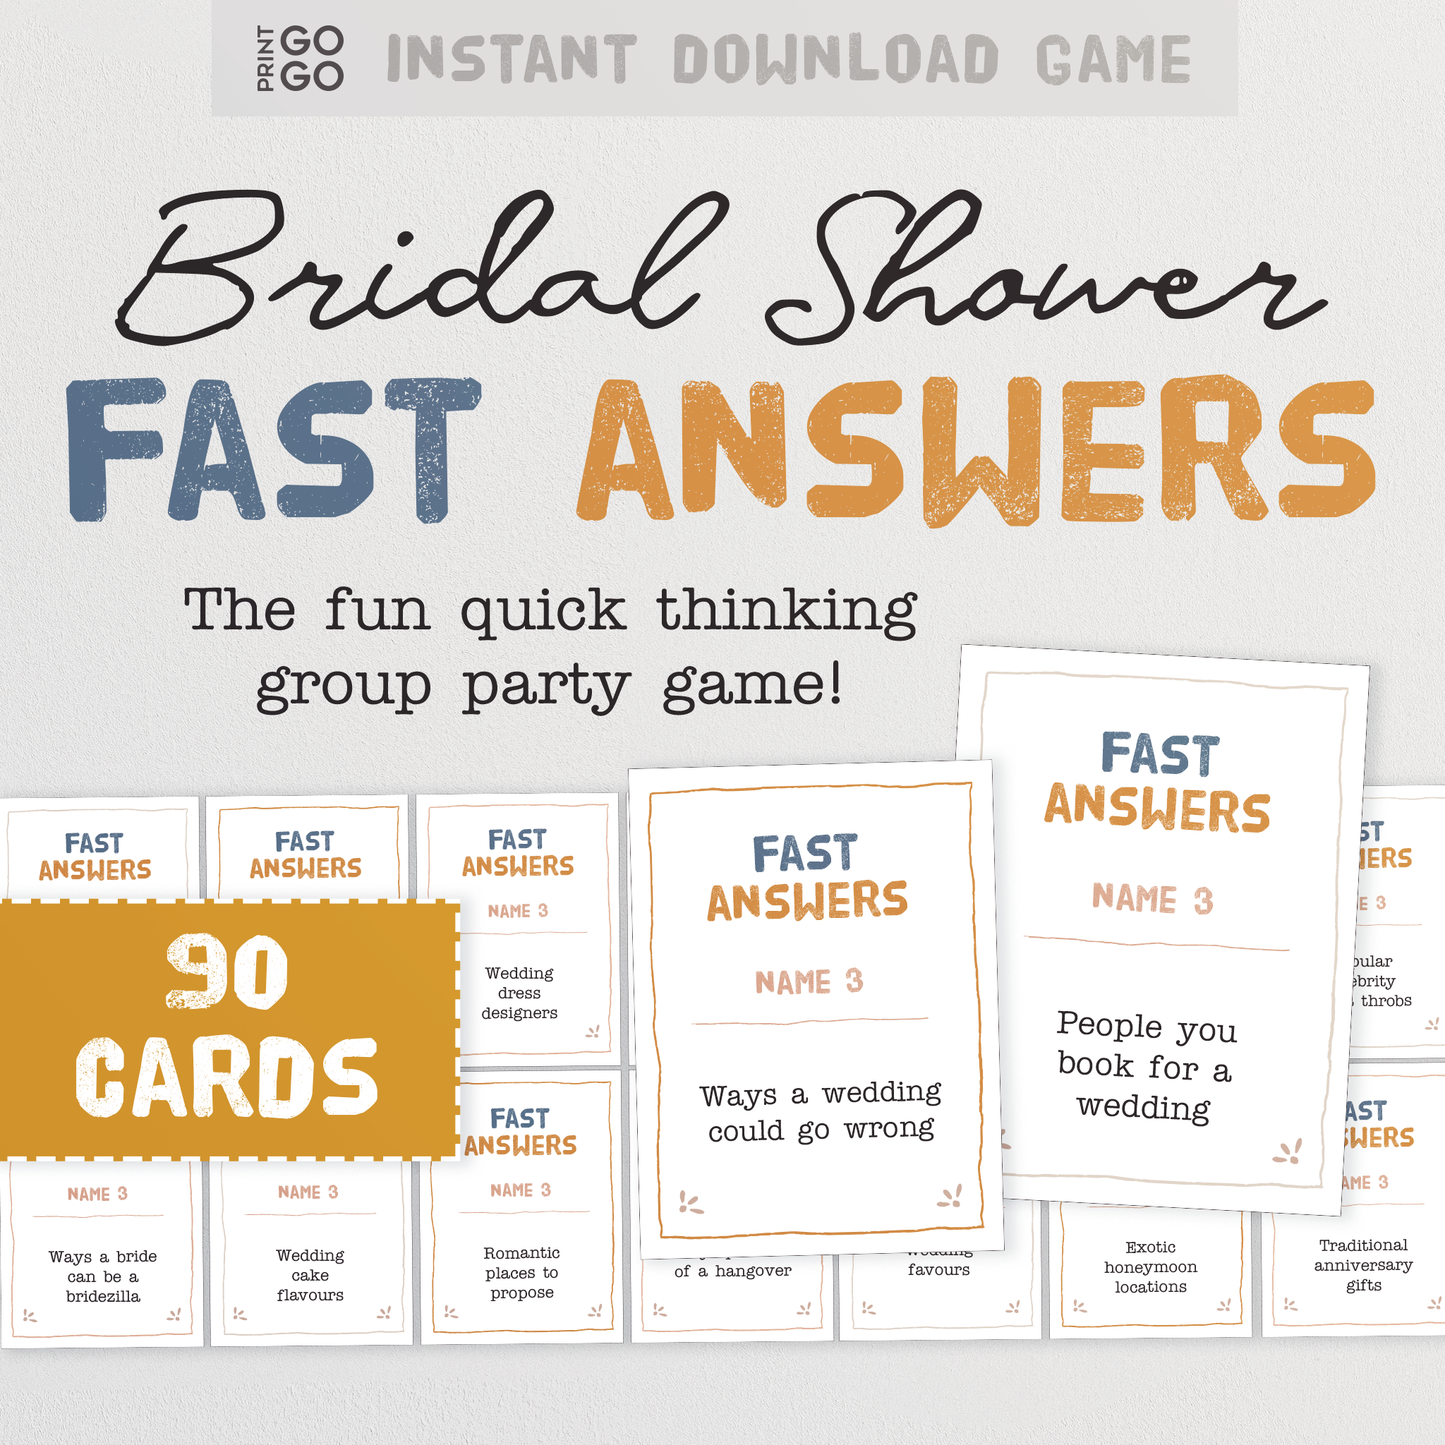 Bridal Shower Fast Answers Game - The Fun Quick Thinking Group Party Game